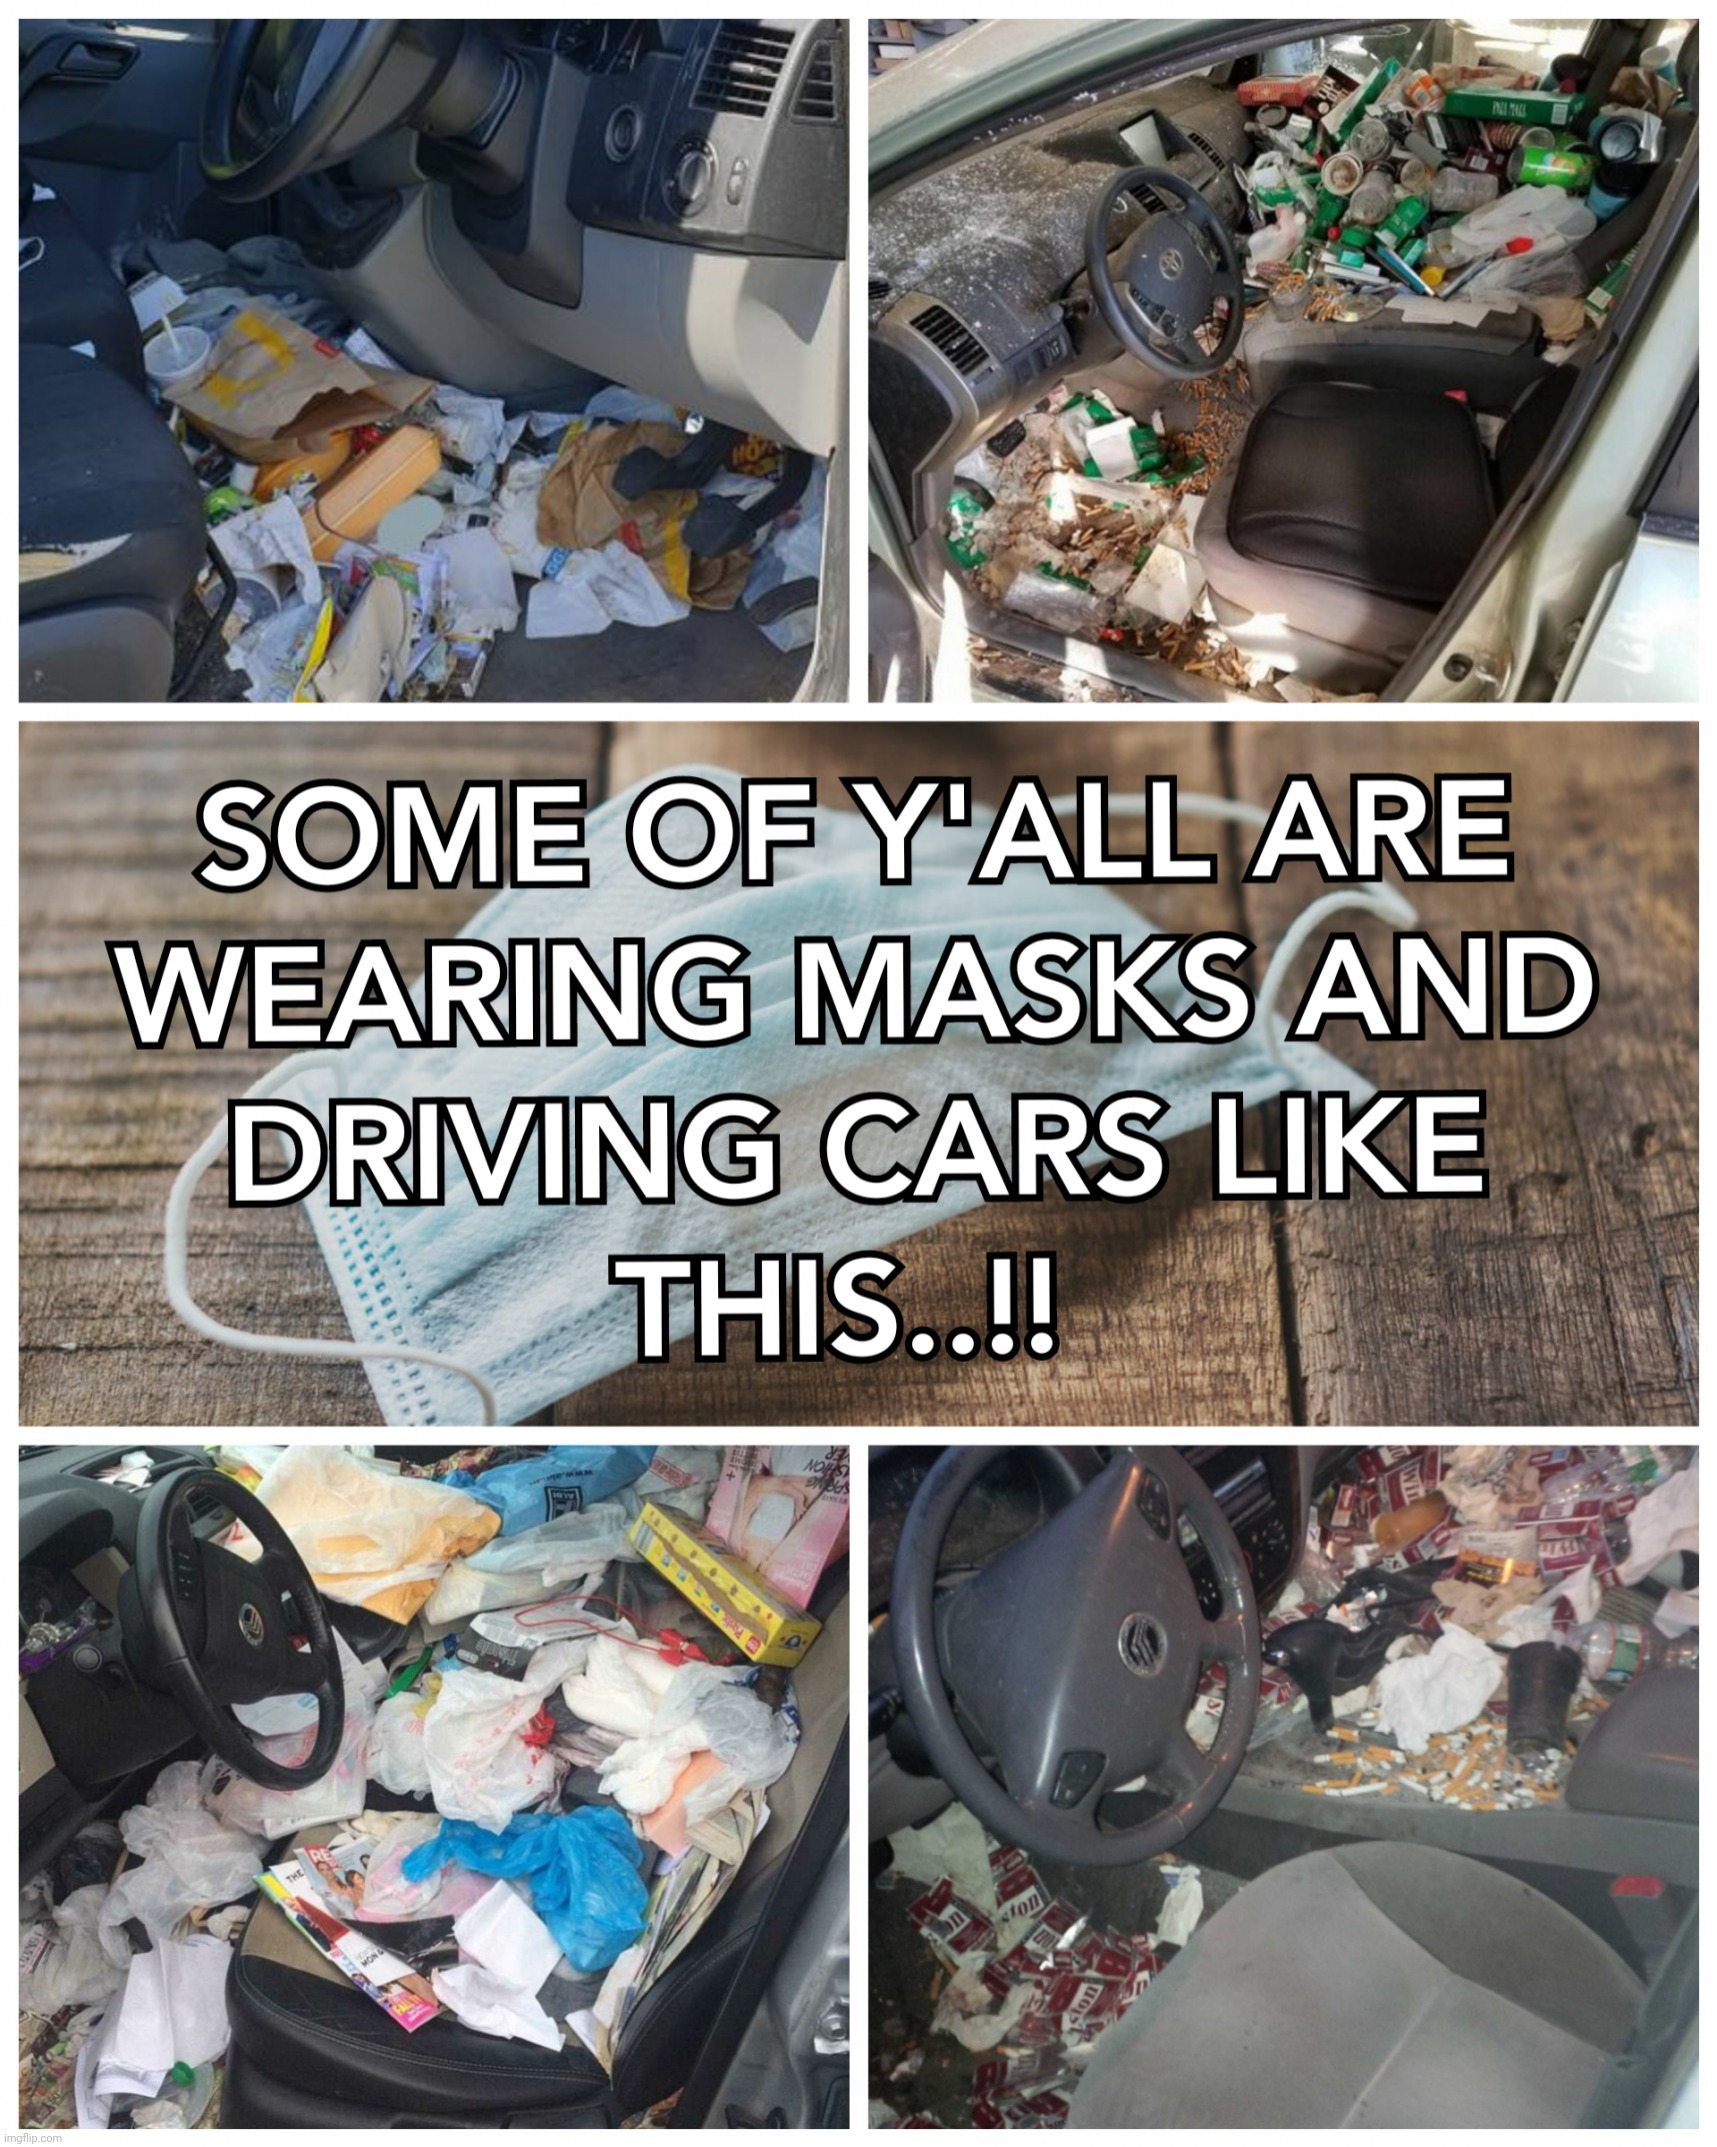 SOME OF Y'ALL ARE WEARING MASKS AND DRIVING CARS LIKE THIS..!! | image tagged in face mask,cars,dirty,covid-19,memes,filthy | made w/ Imgflip meme maker